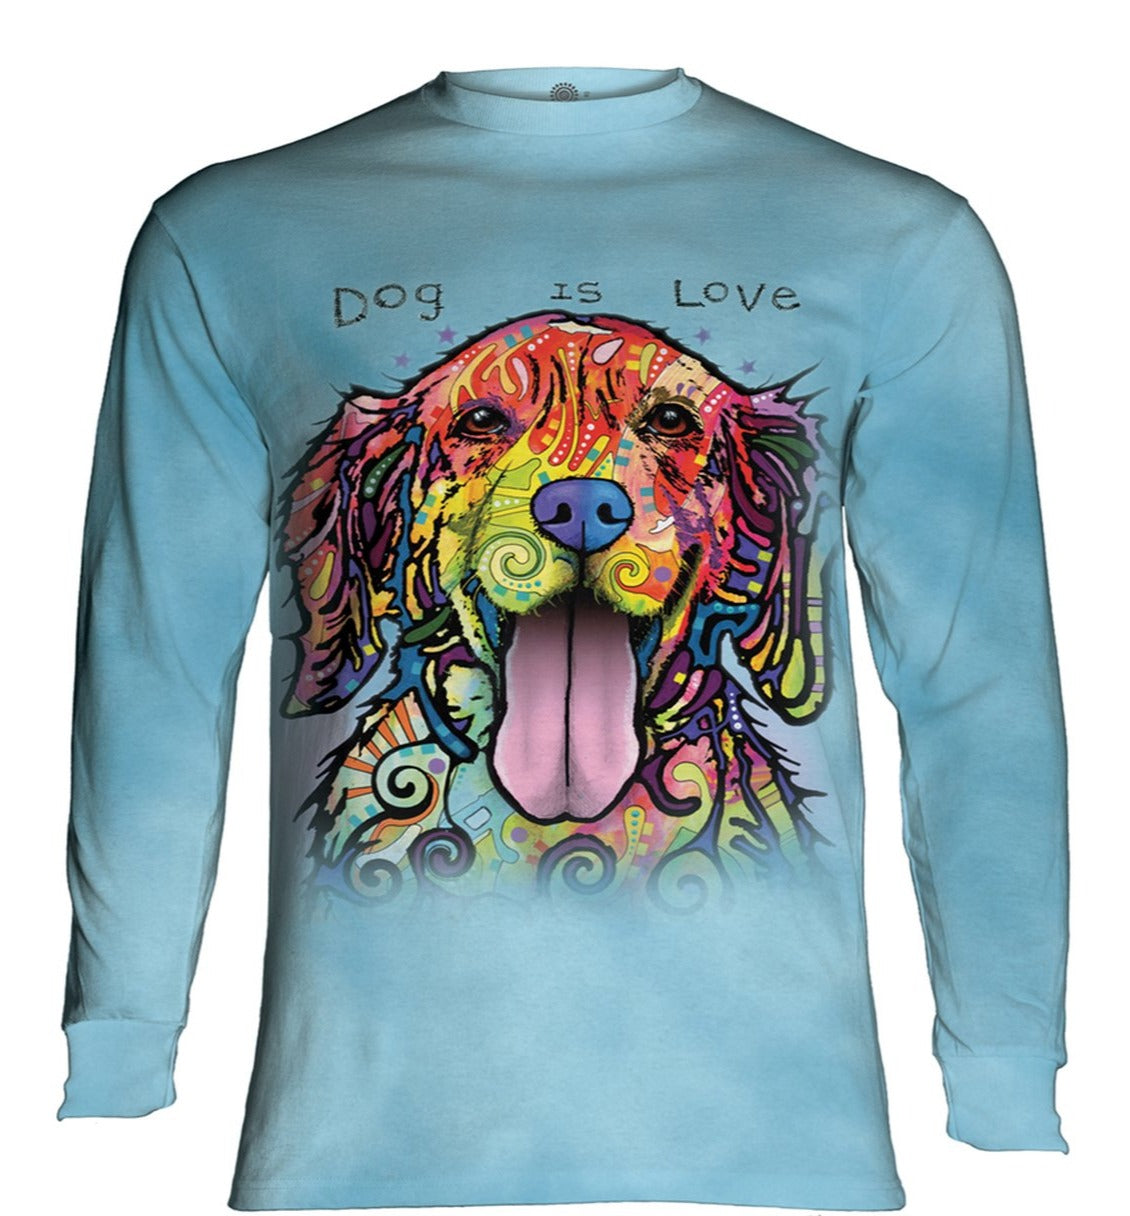 The Mountain Dog Is Love Russo Art Long Sleeve Shirt